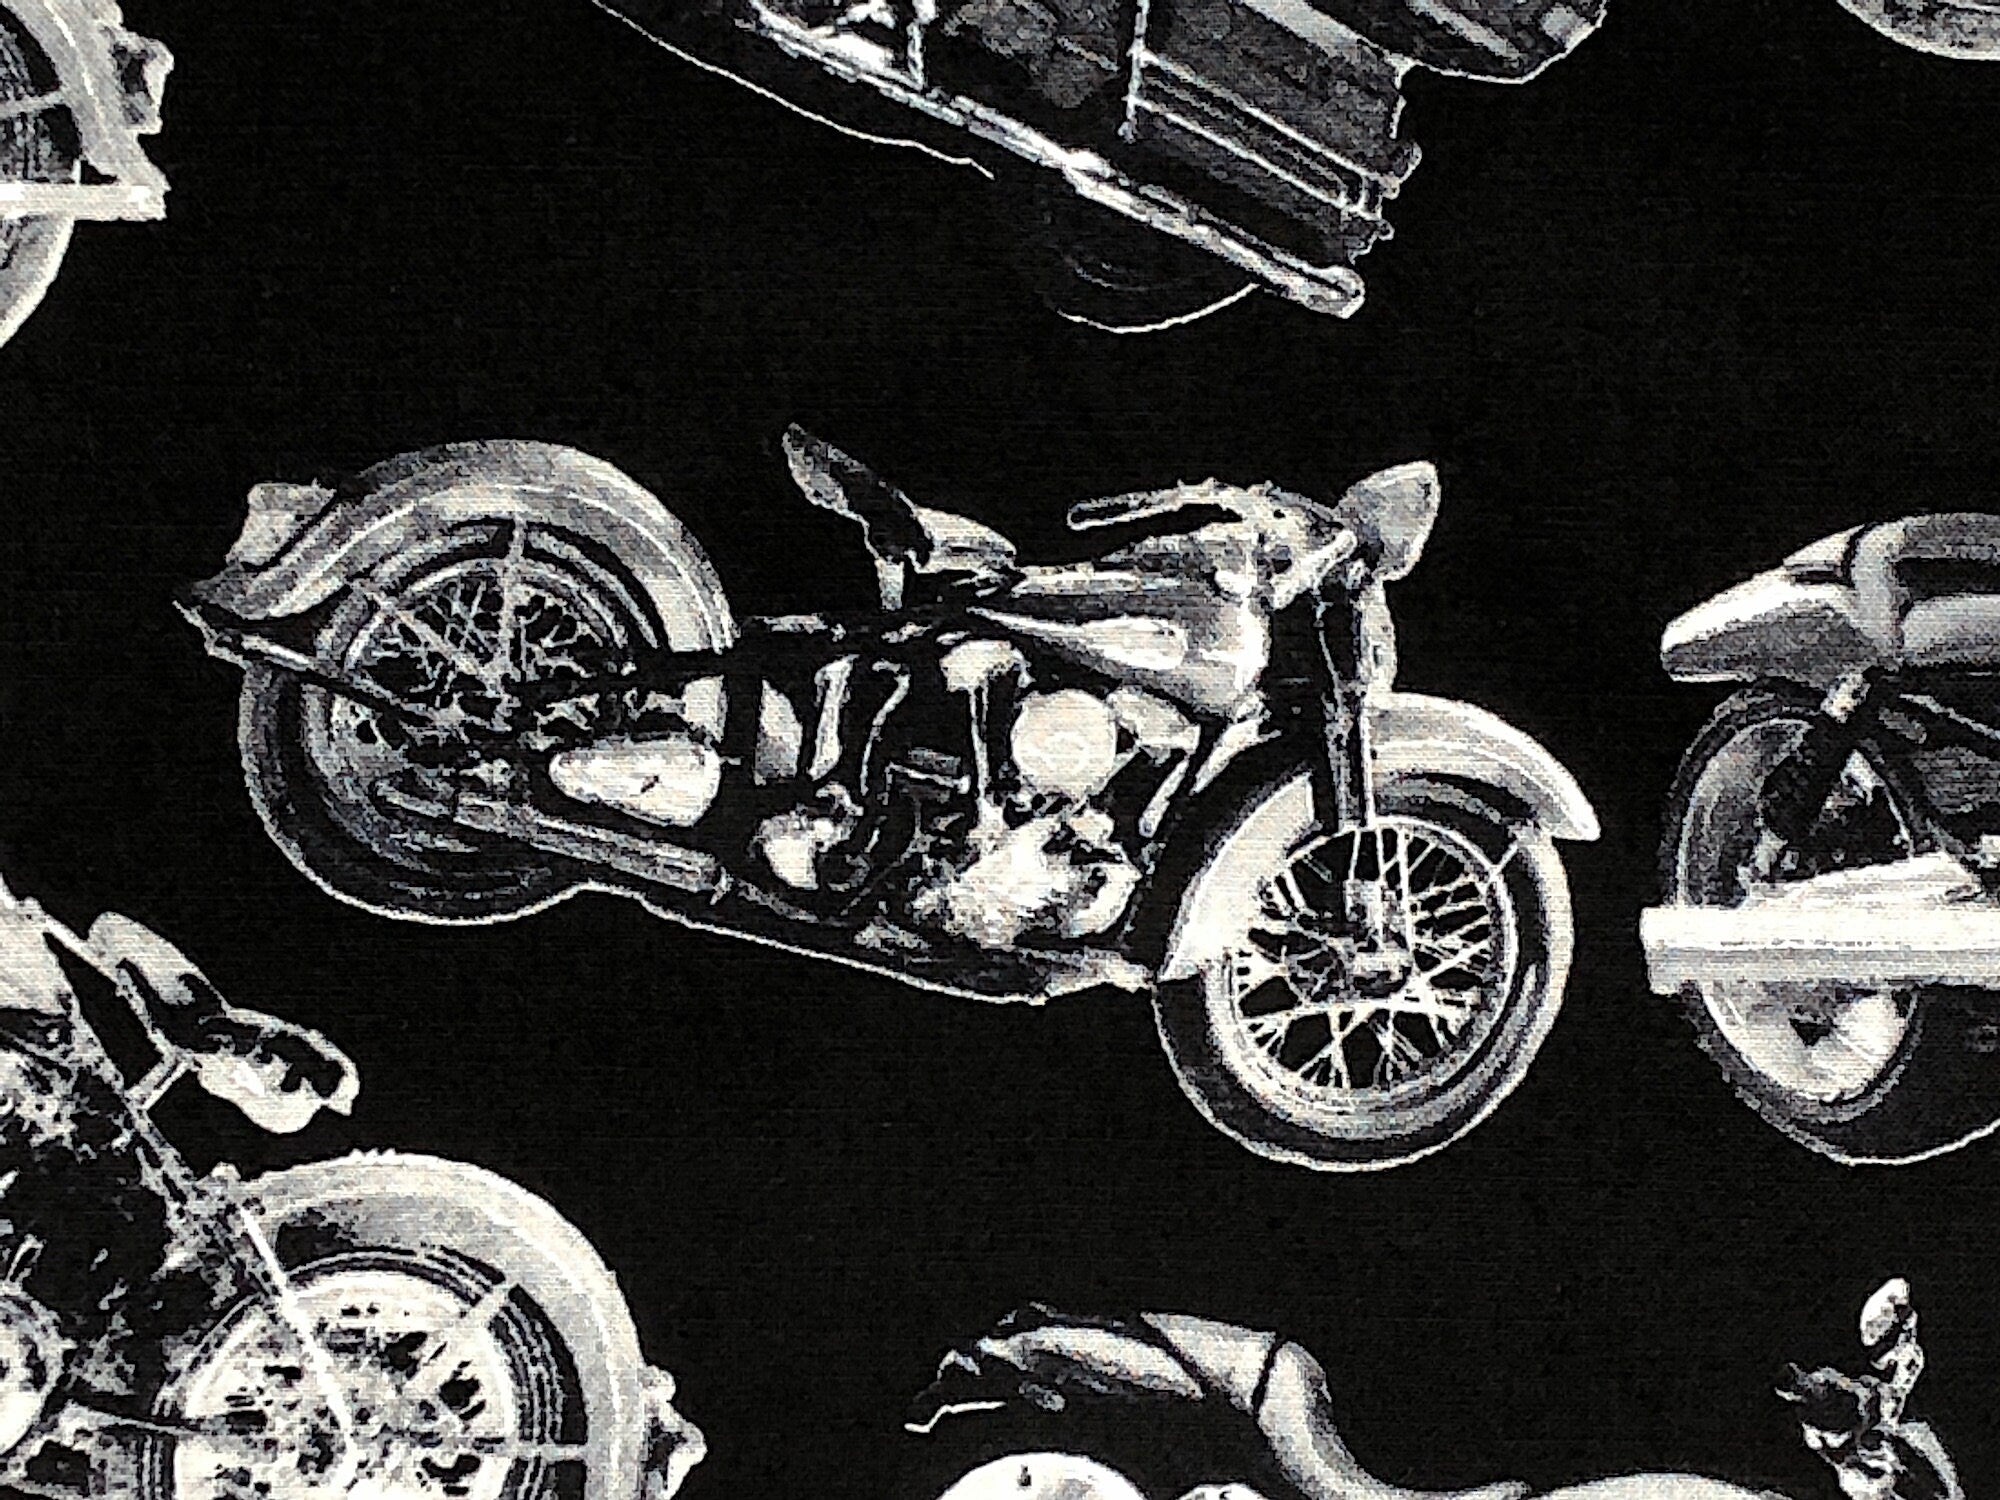 Close up of a motorbike on a black background.